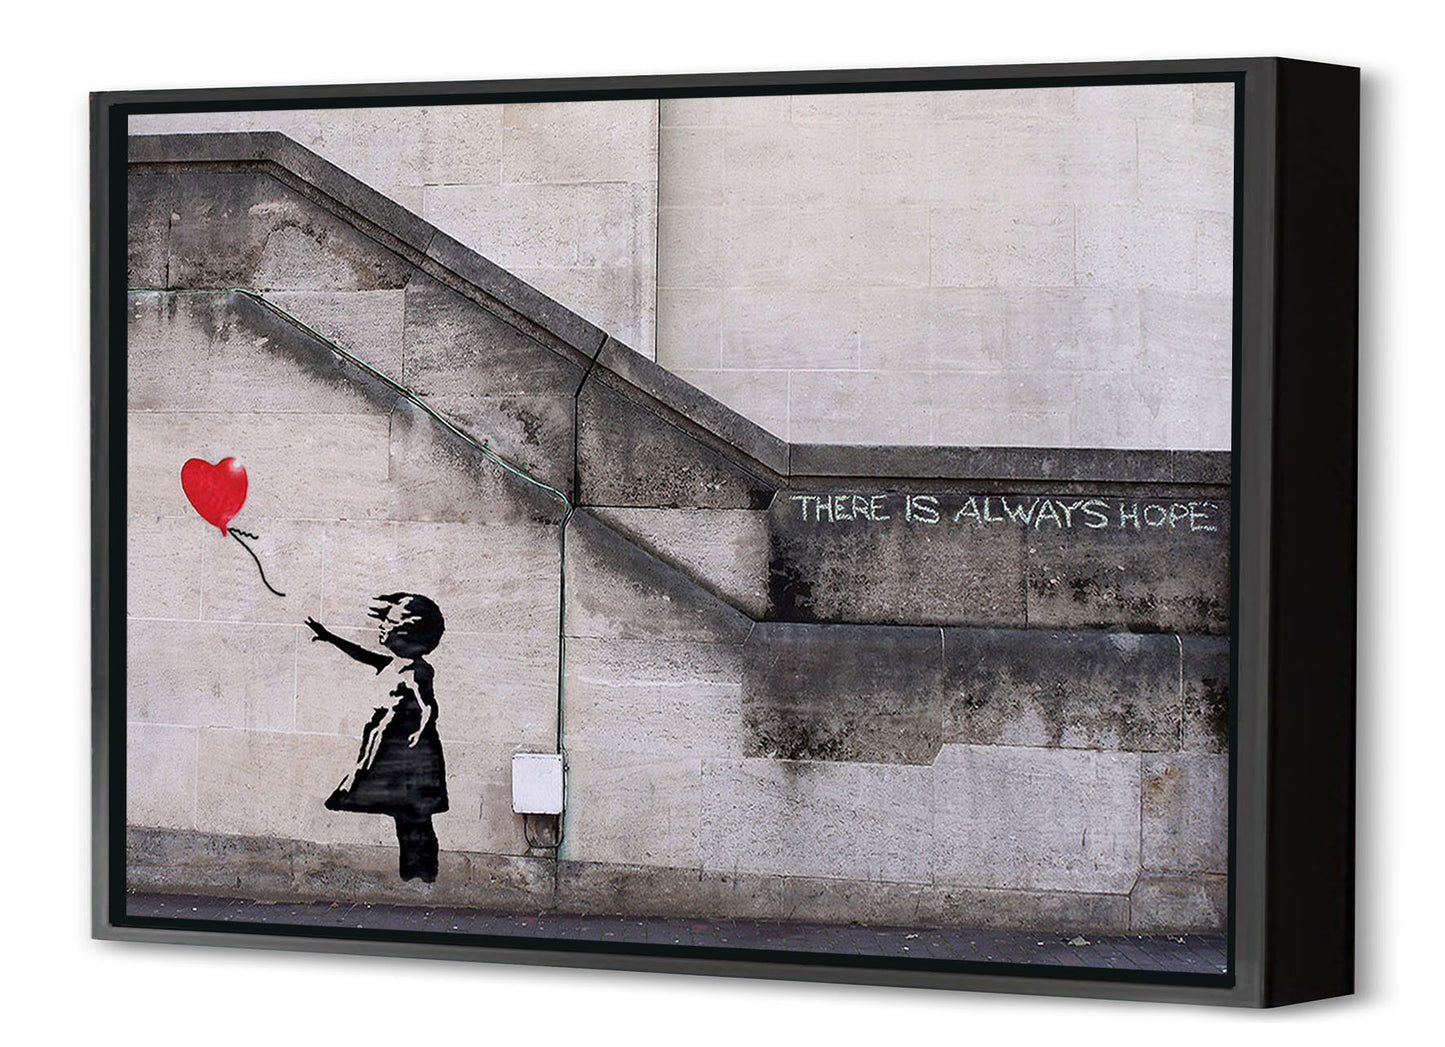 There is always hope-banksy, print-Canvas Print with Box Frame-40 x 60 cm-BLUE SHAKER